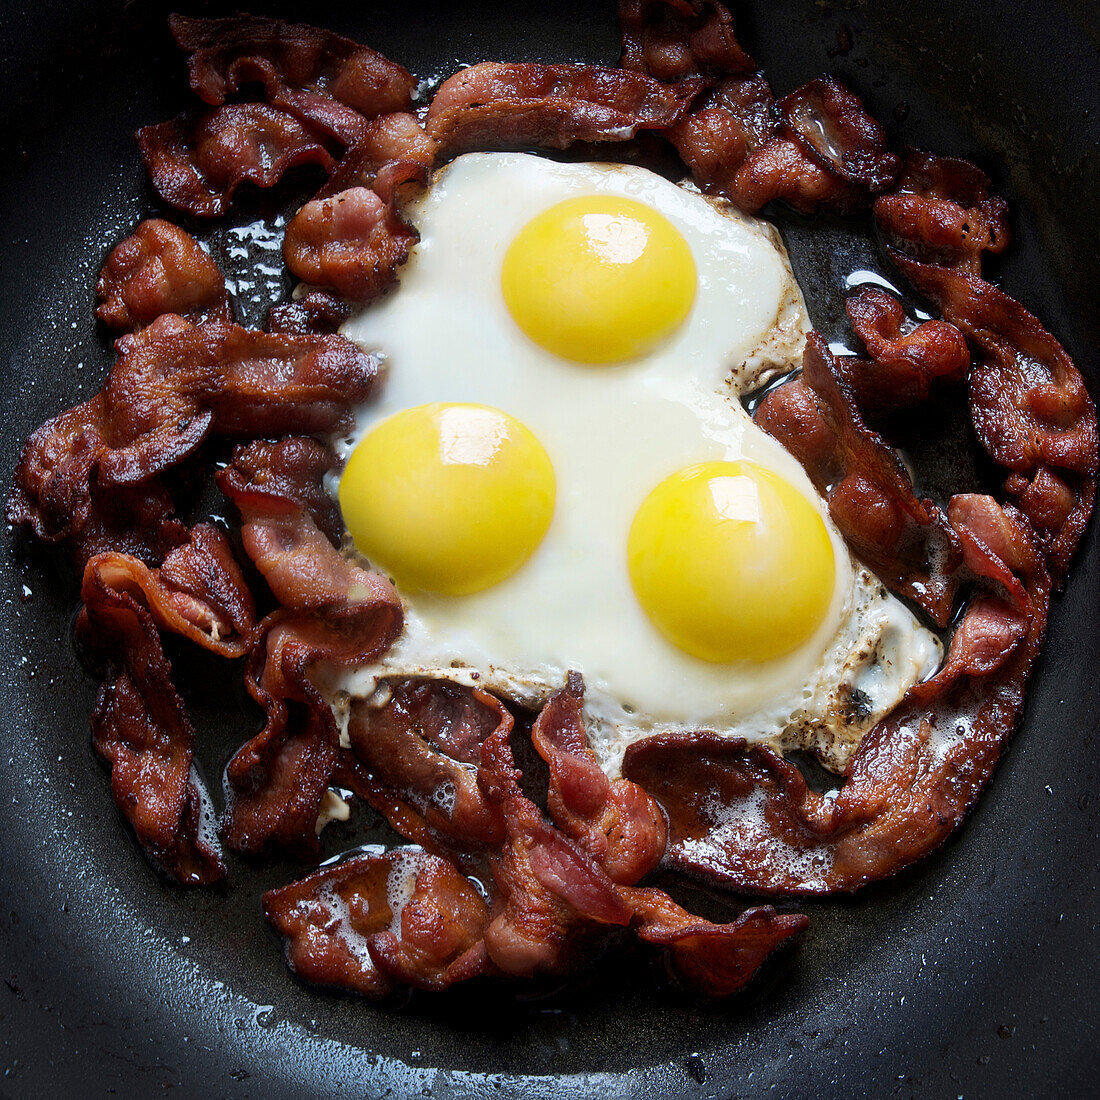 greasy frying pan full of bacon and eggs